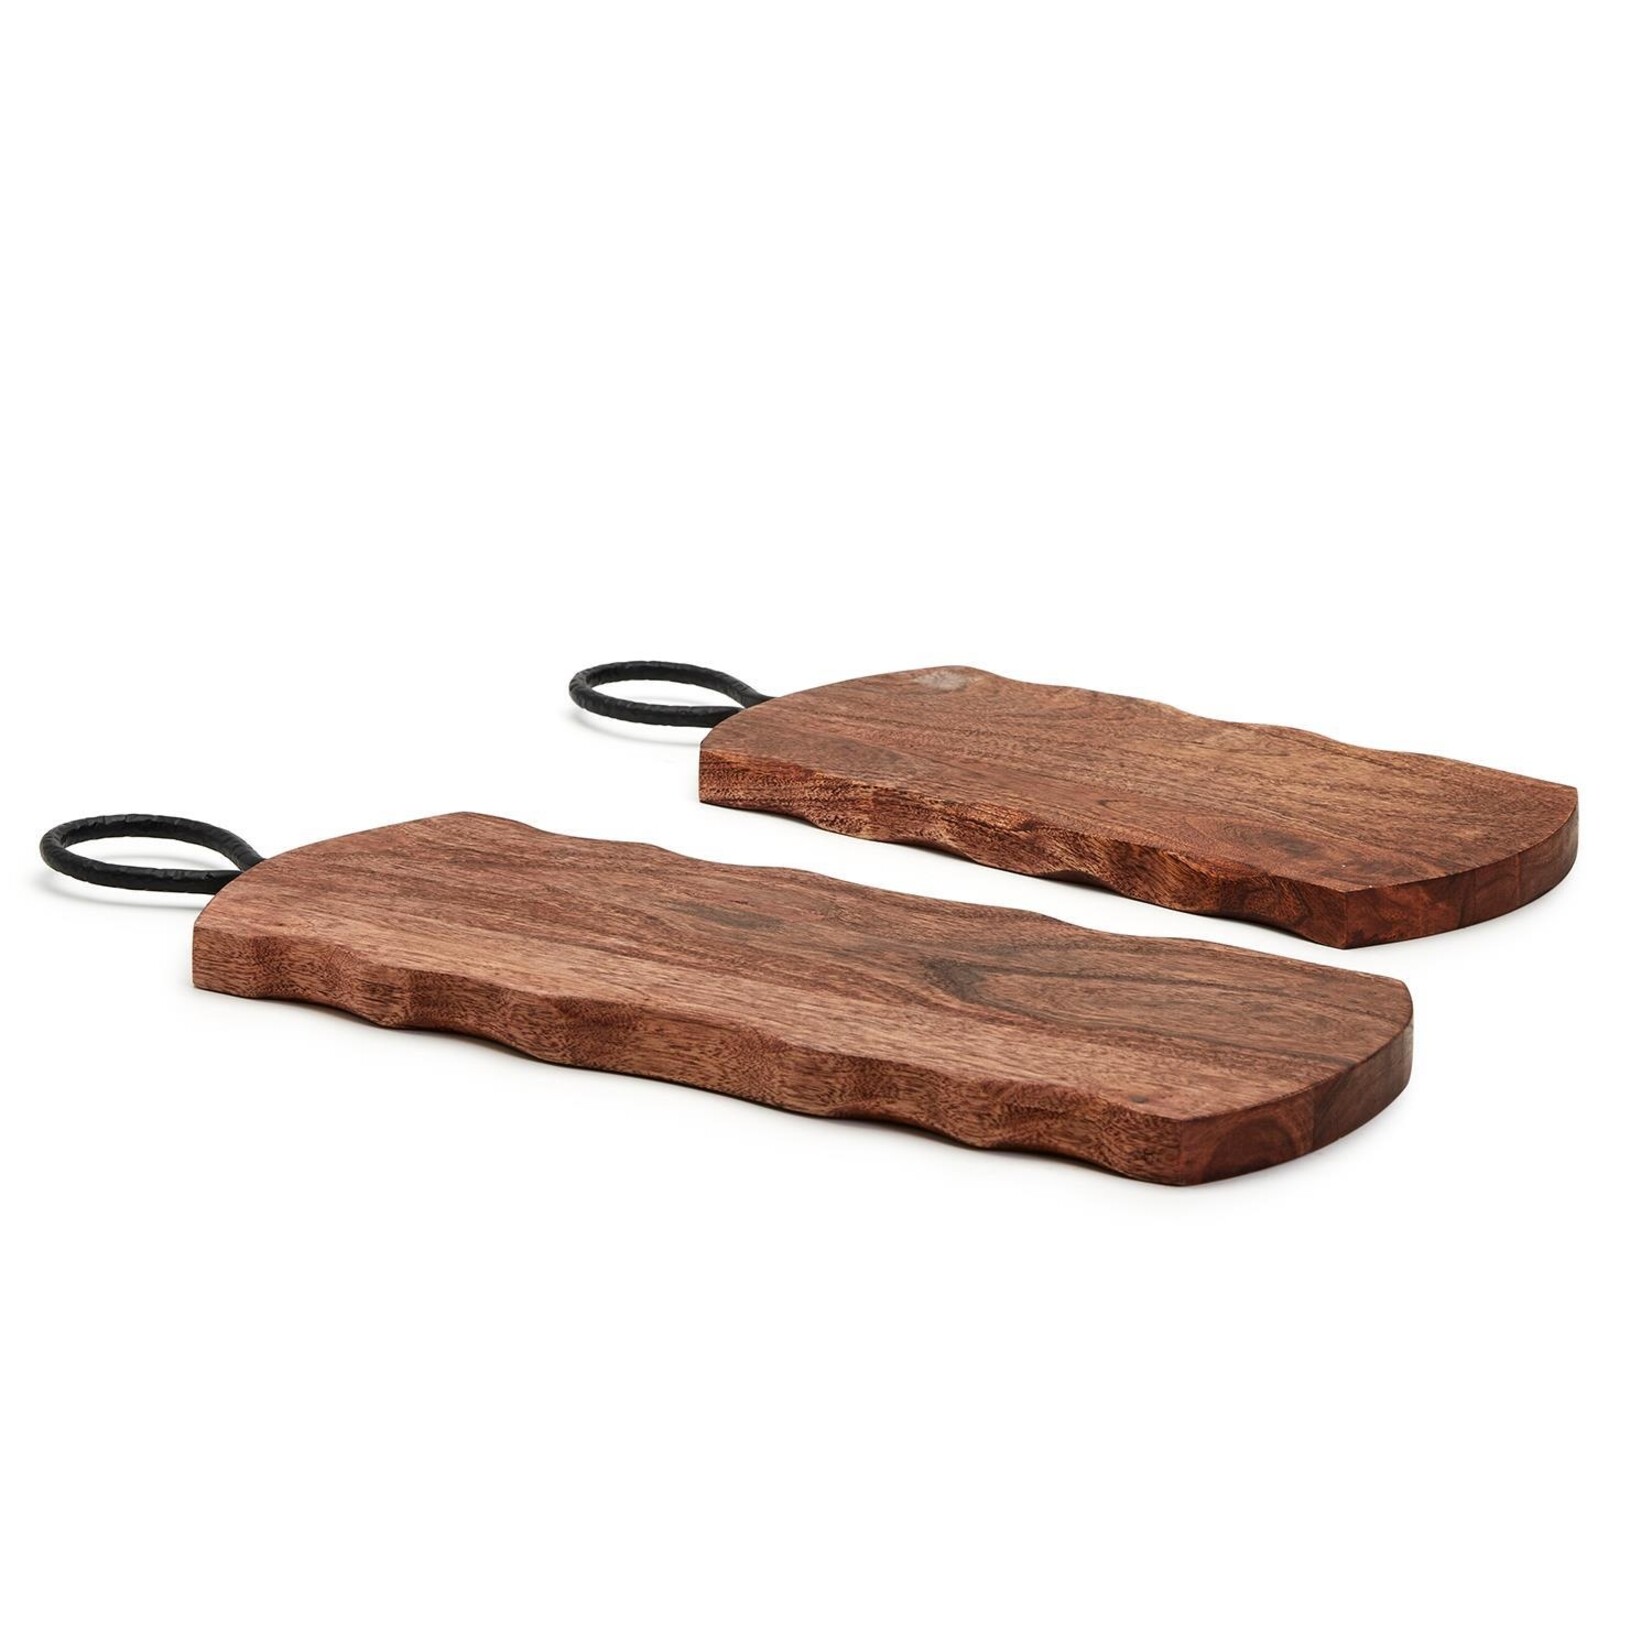 Two's Company Rustic Edge Serving Board set of 2 w/ Iron Handle